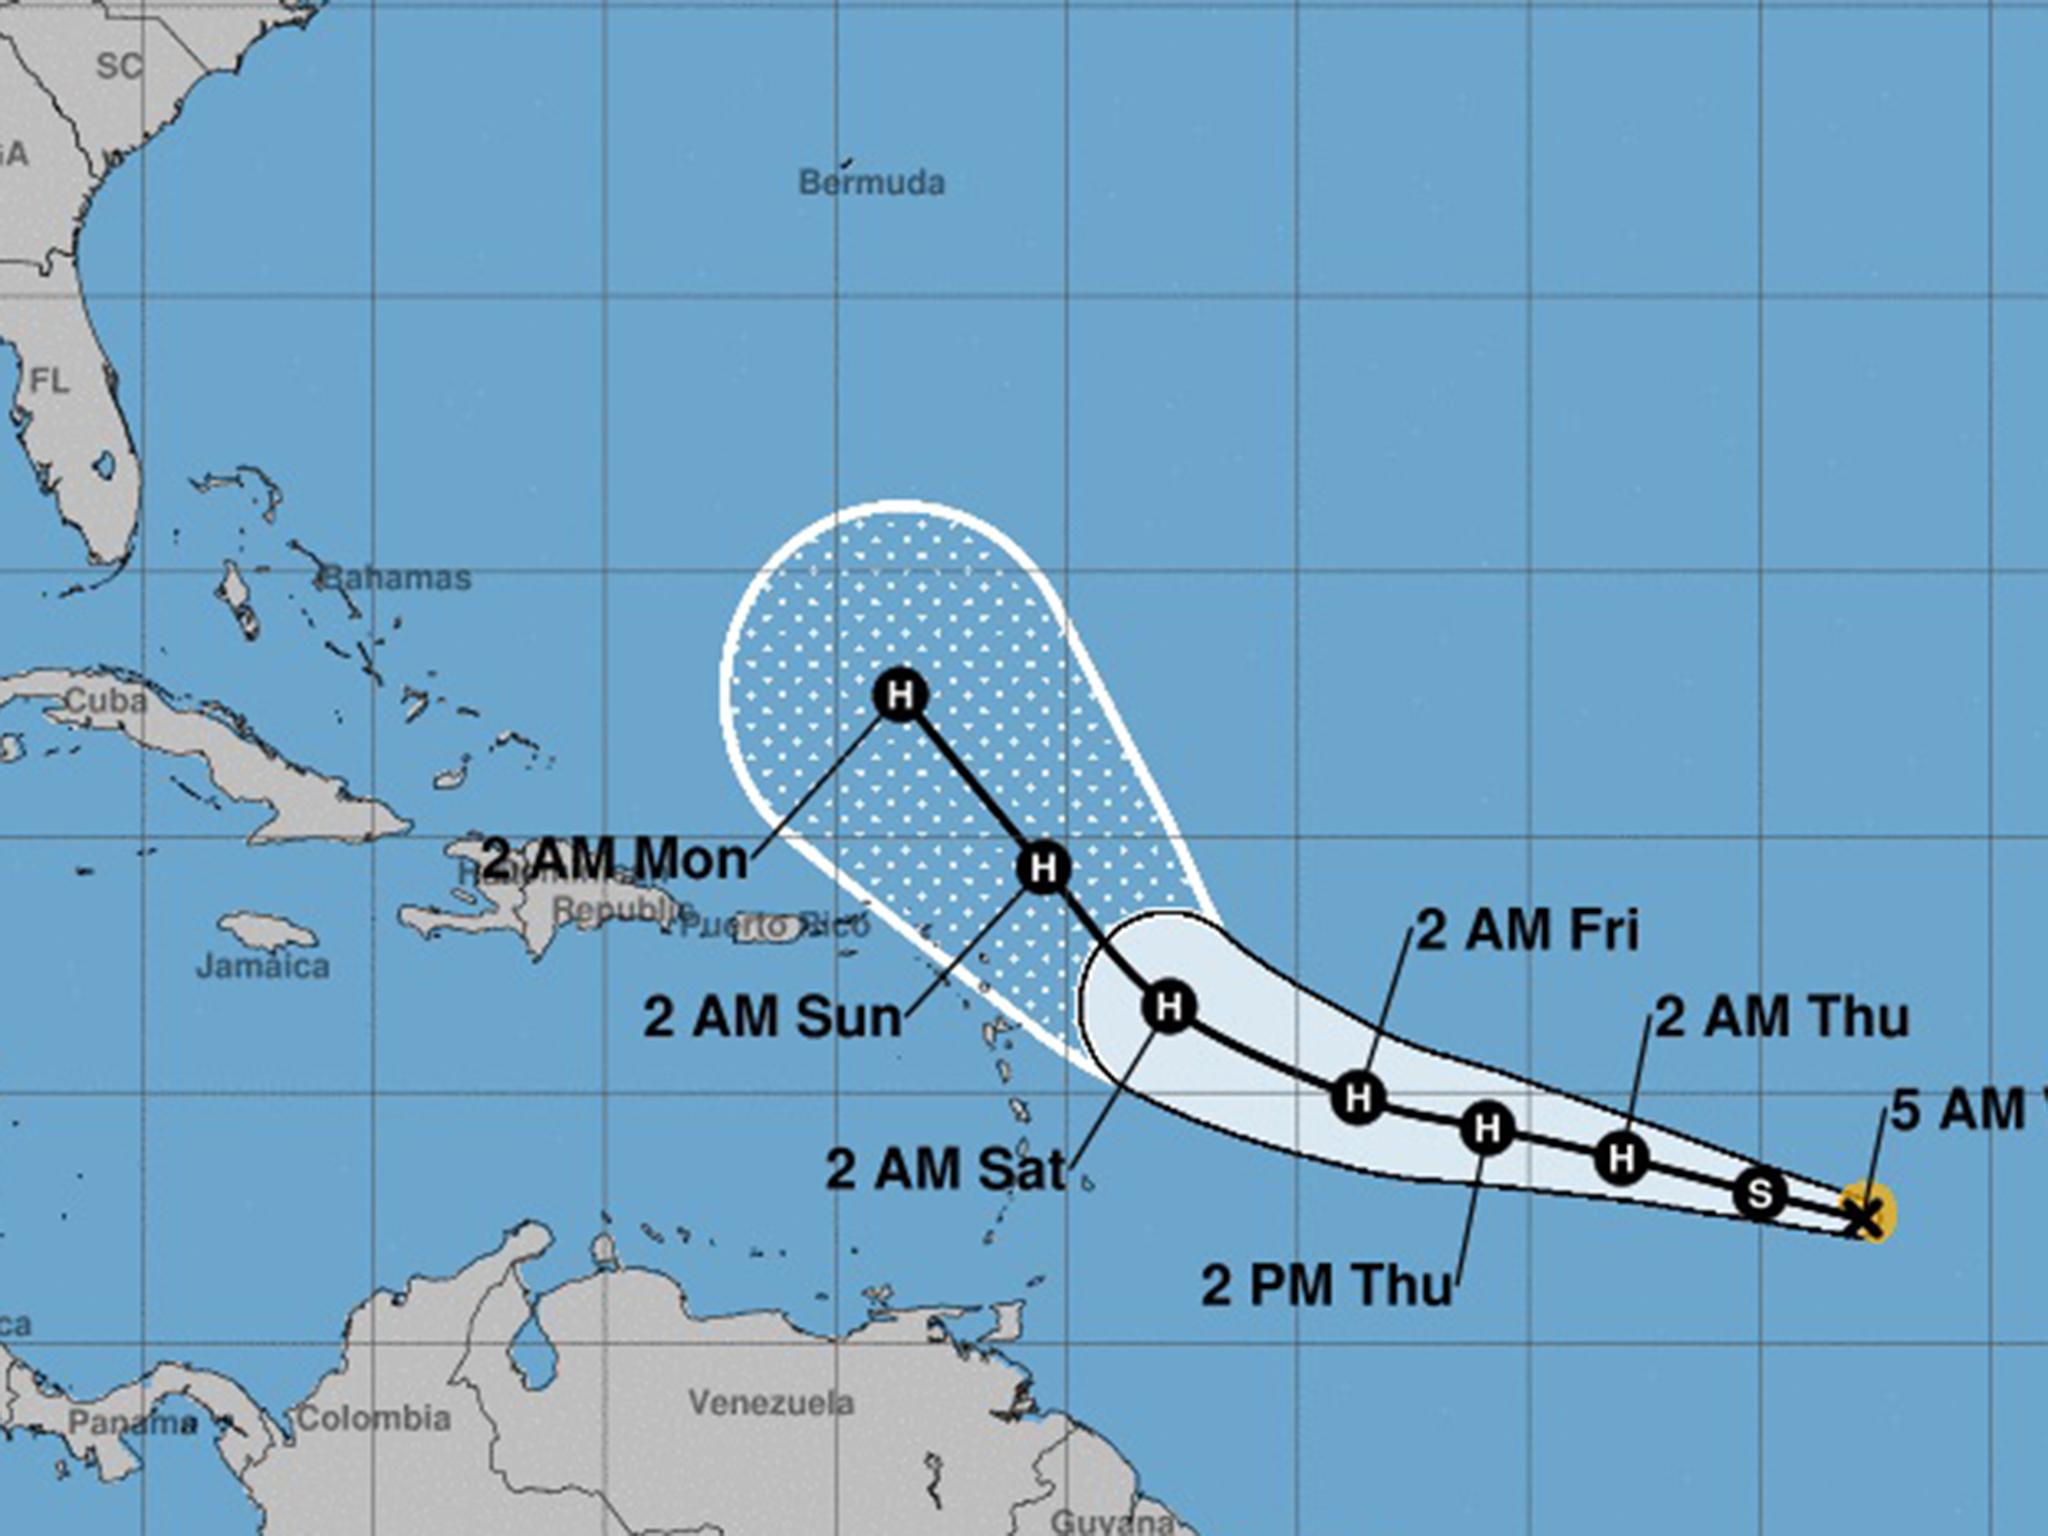 The predicted path of tropical storm Jose